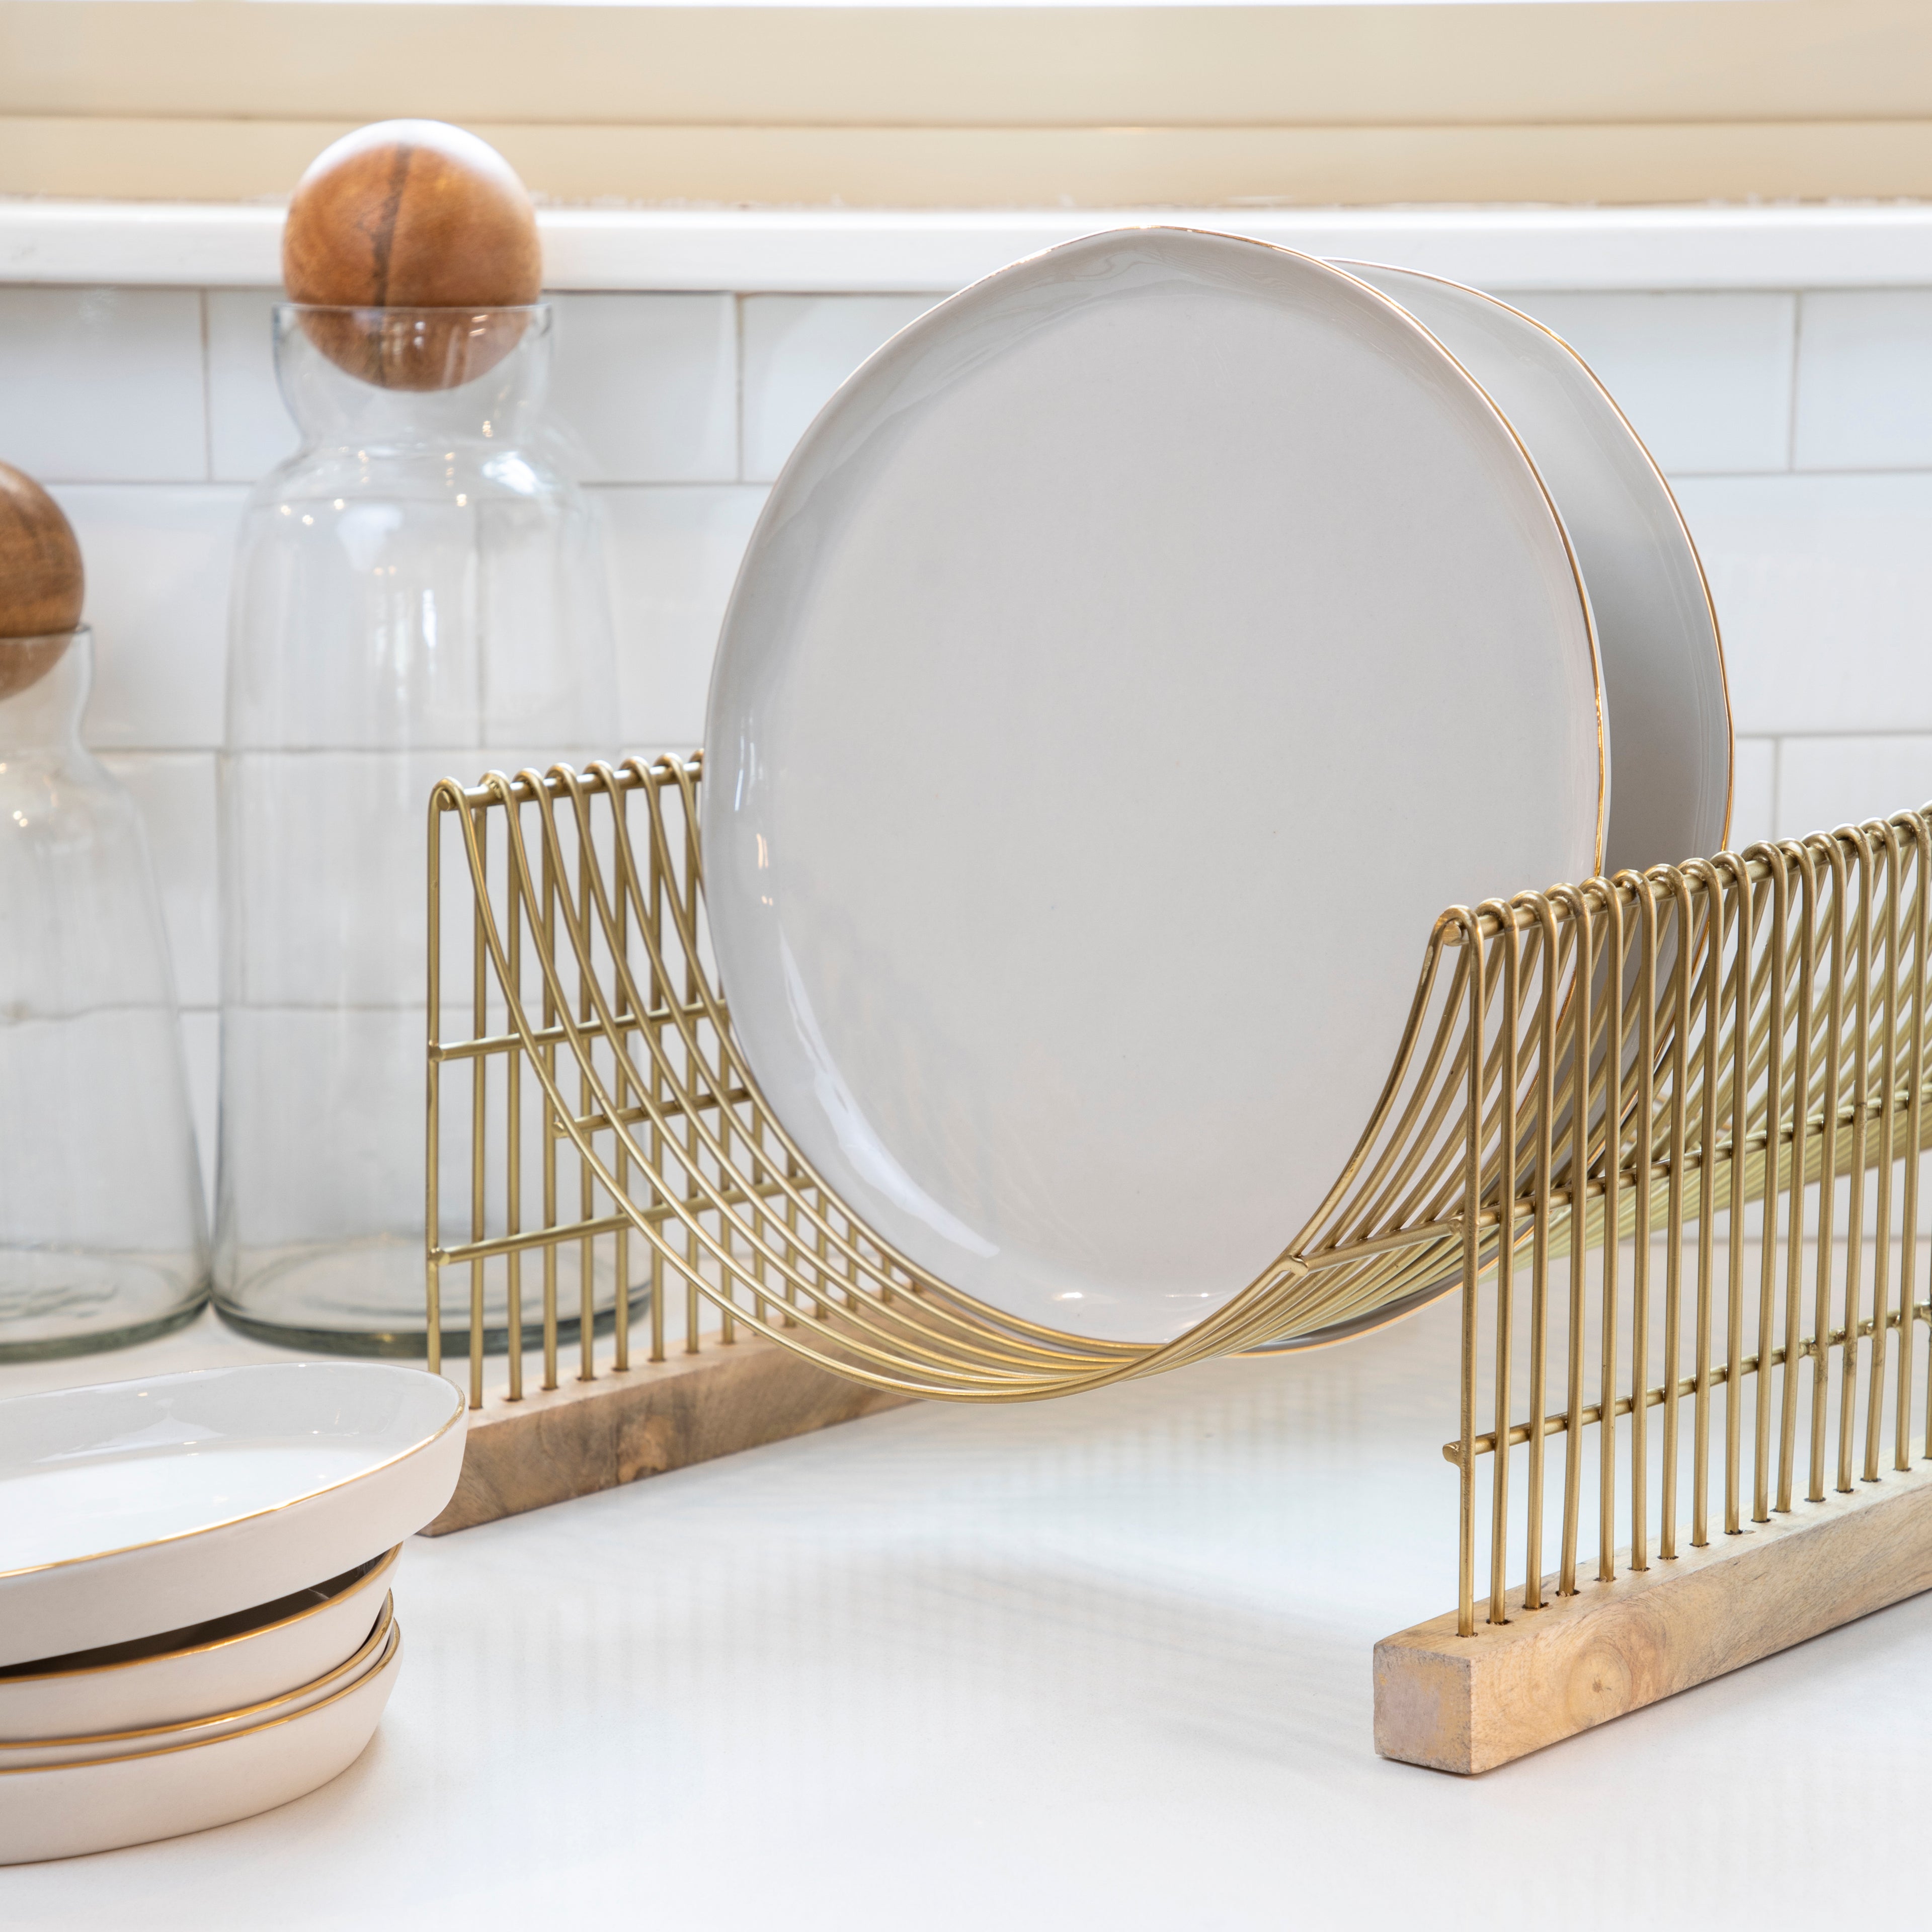 ILO Clam Shell Small Dish Drainer Rack White and Sage Green - Homelook Shop